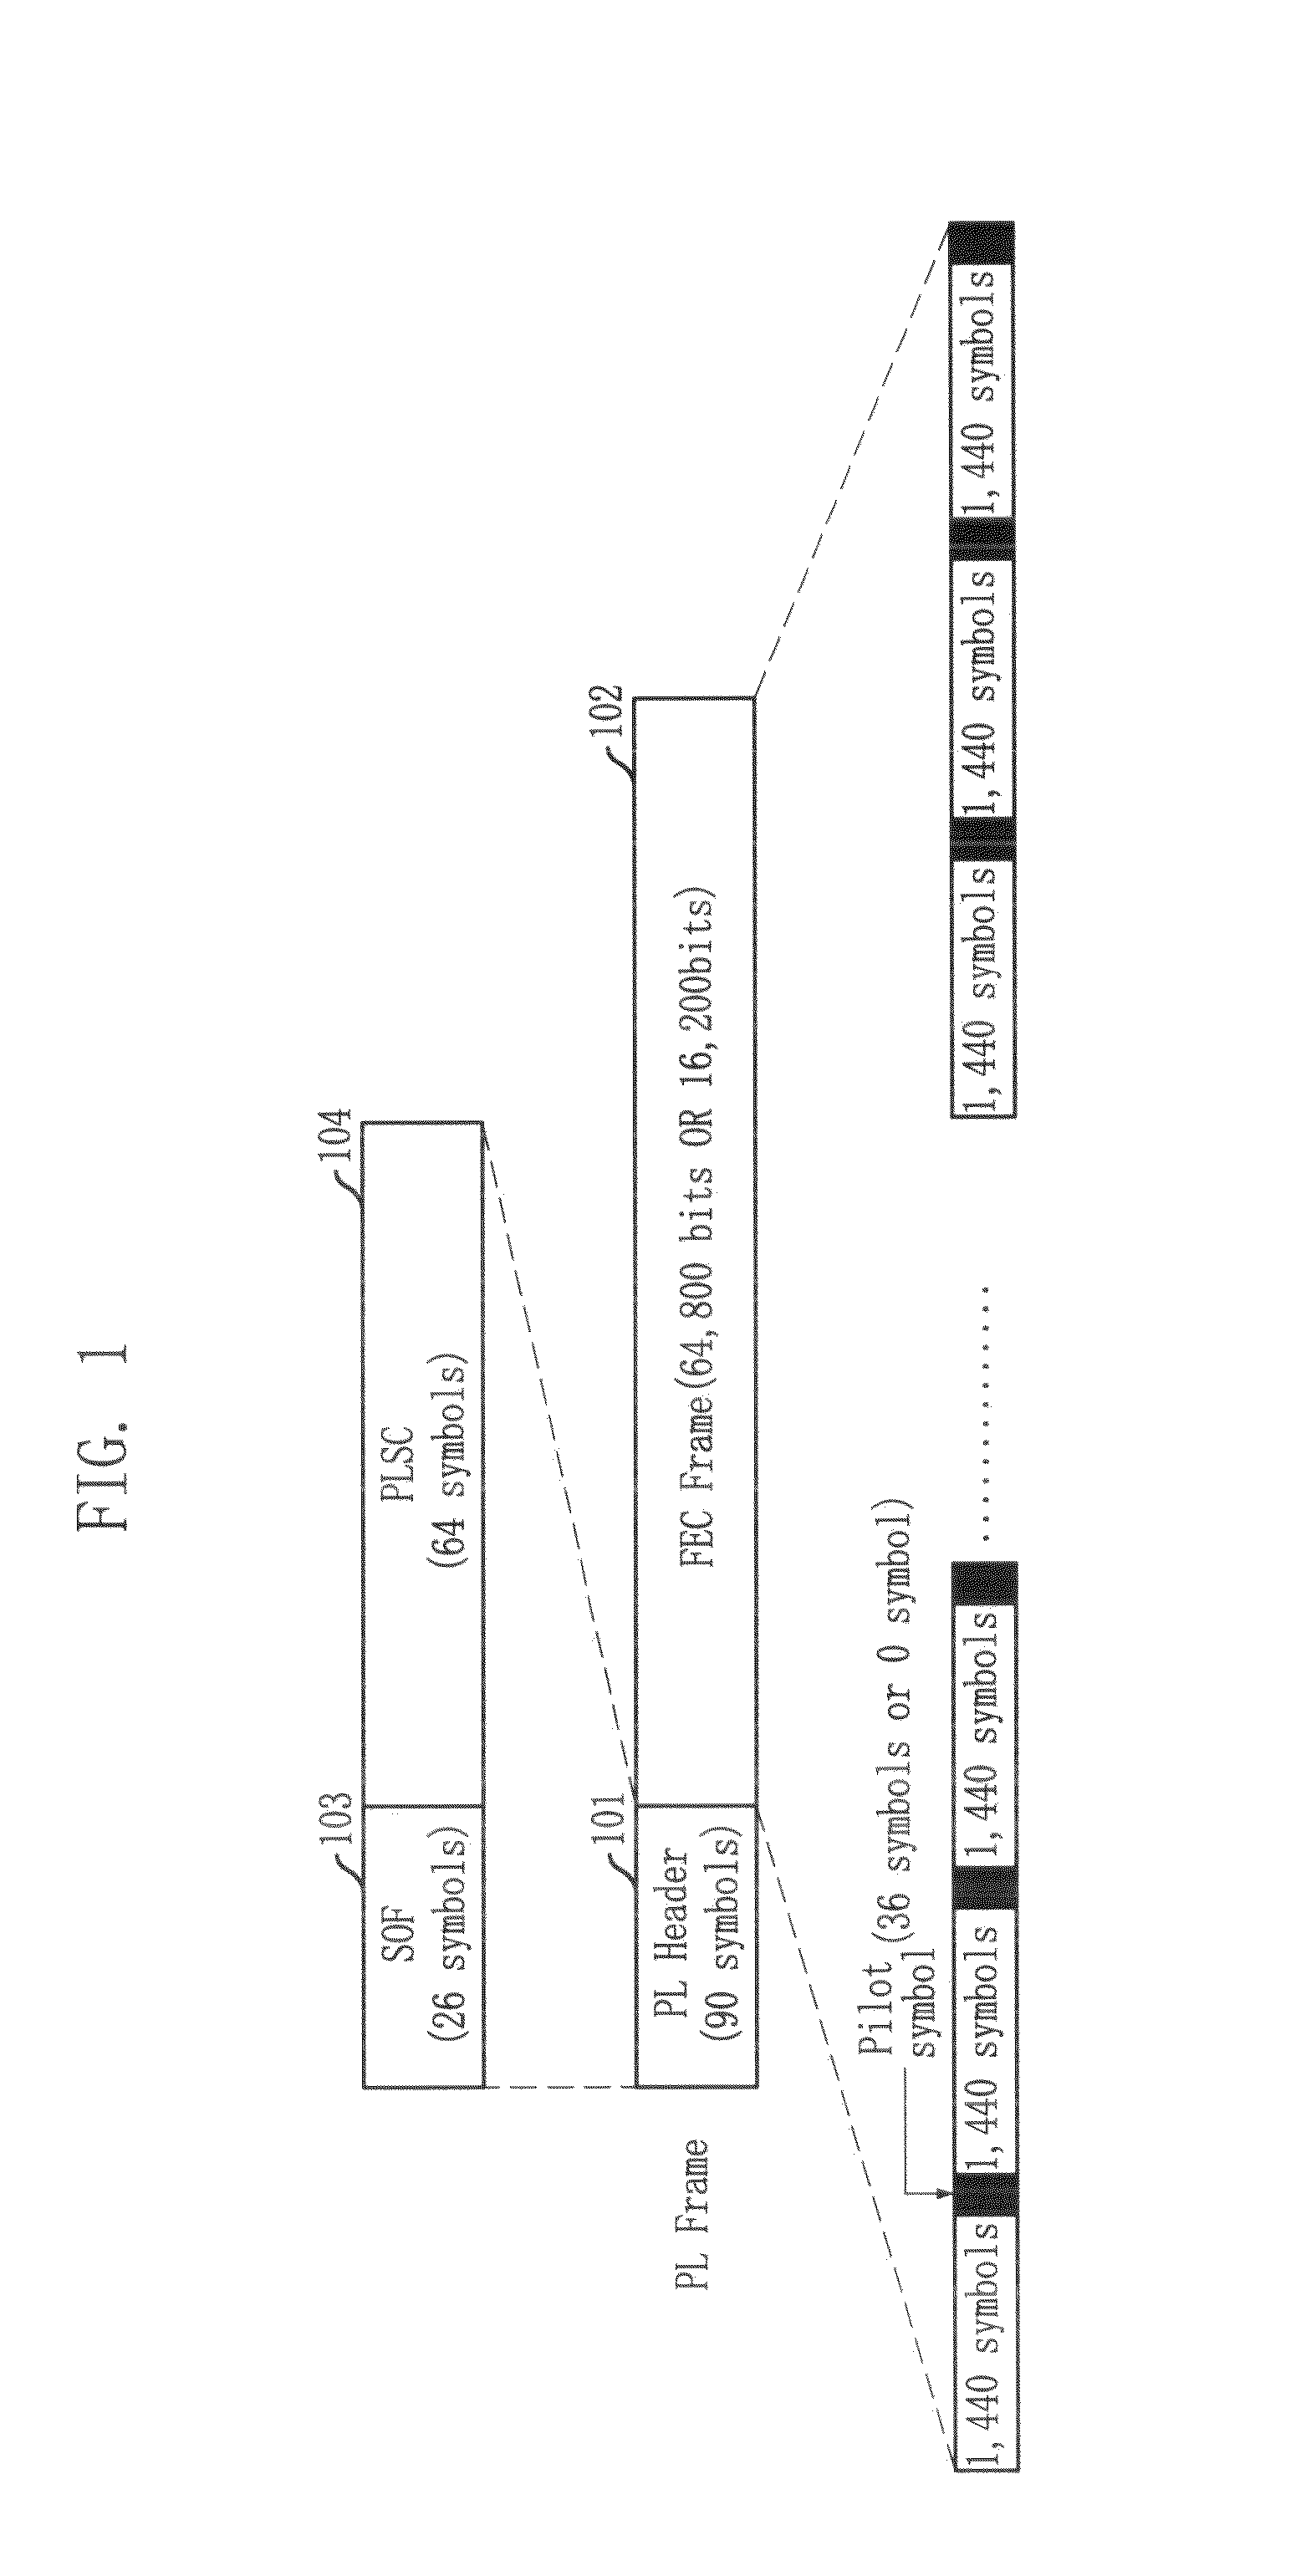 Method for detecting frame synchronization and structure in dvb-s2 system